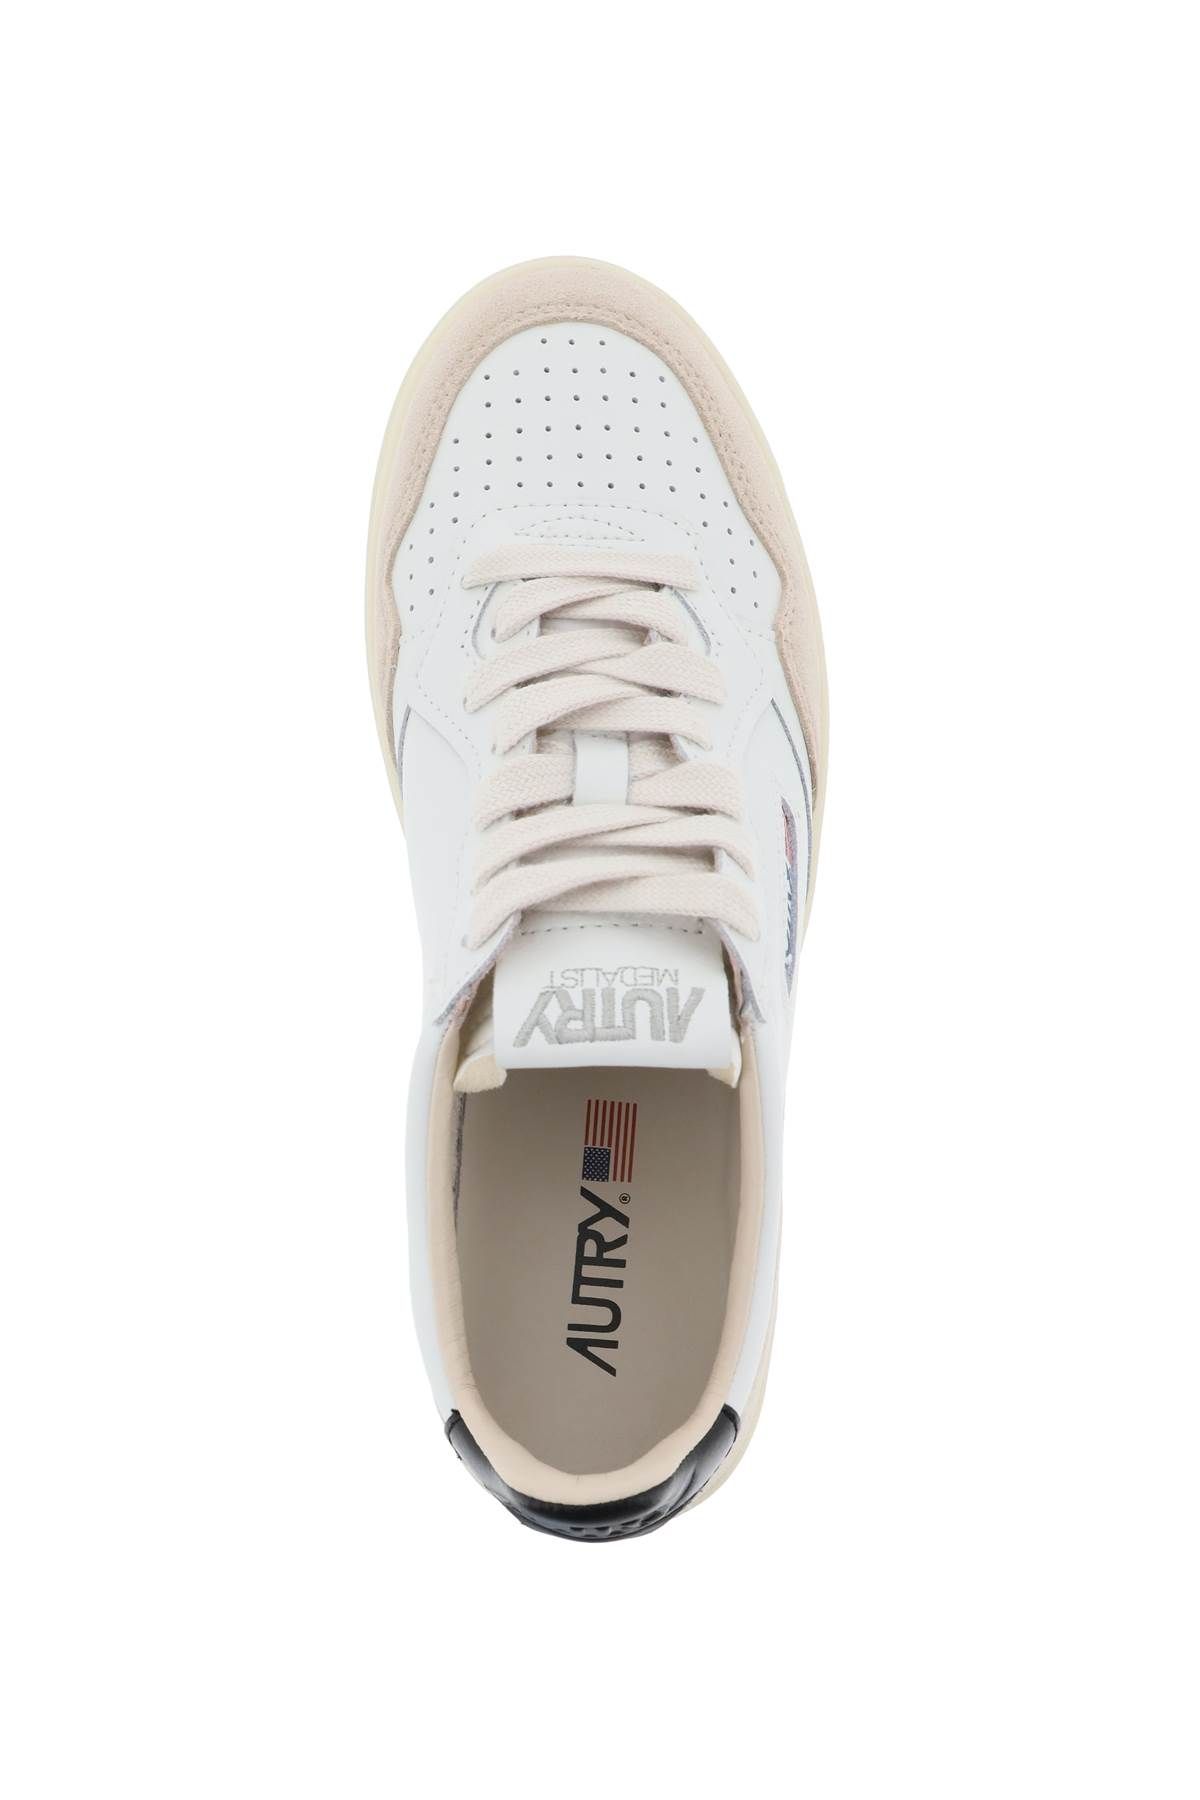 Shop Autry Leather Medalist Low Sneakers In White,black,beige